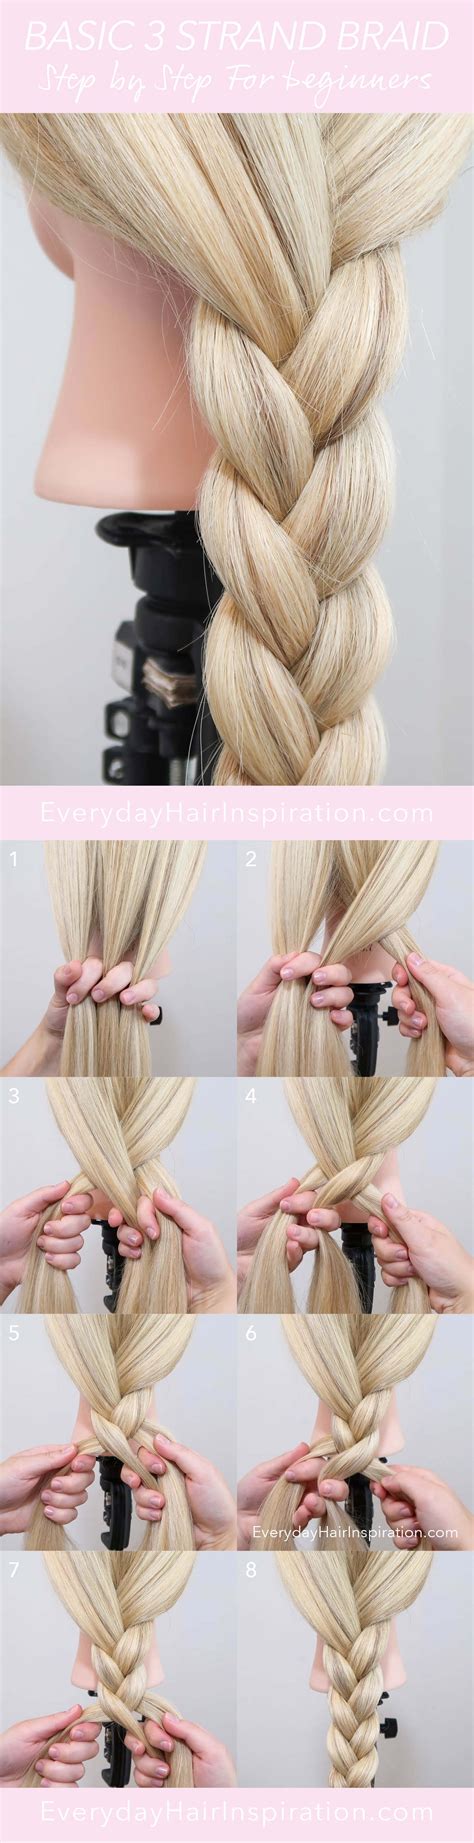 Perfect How To Plait Hair Step By Step With Pictures For Hair Ideas